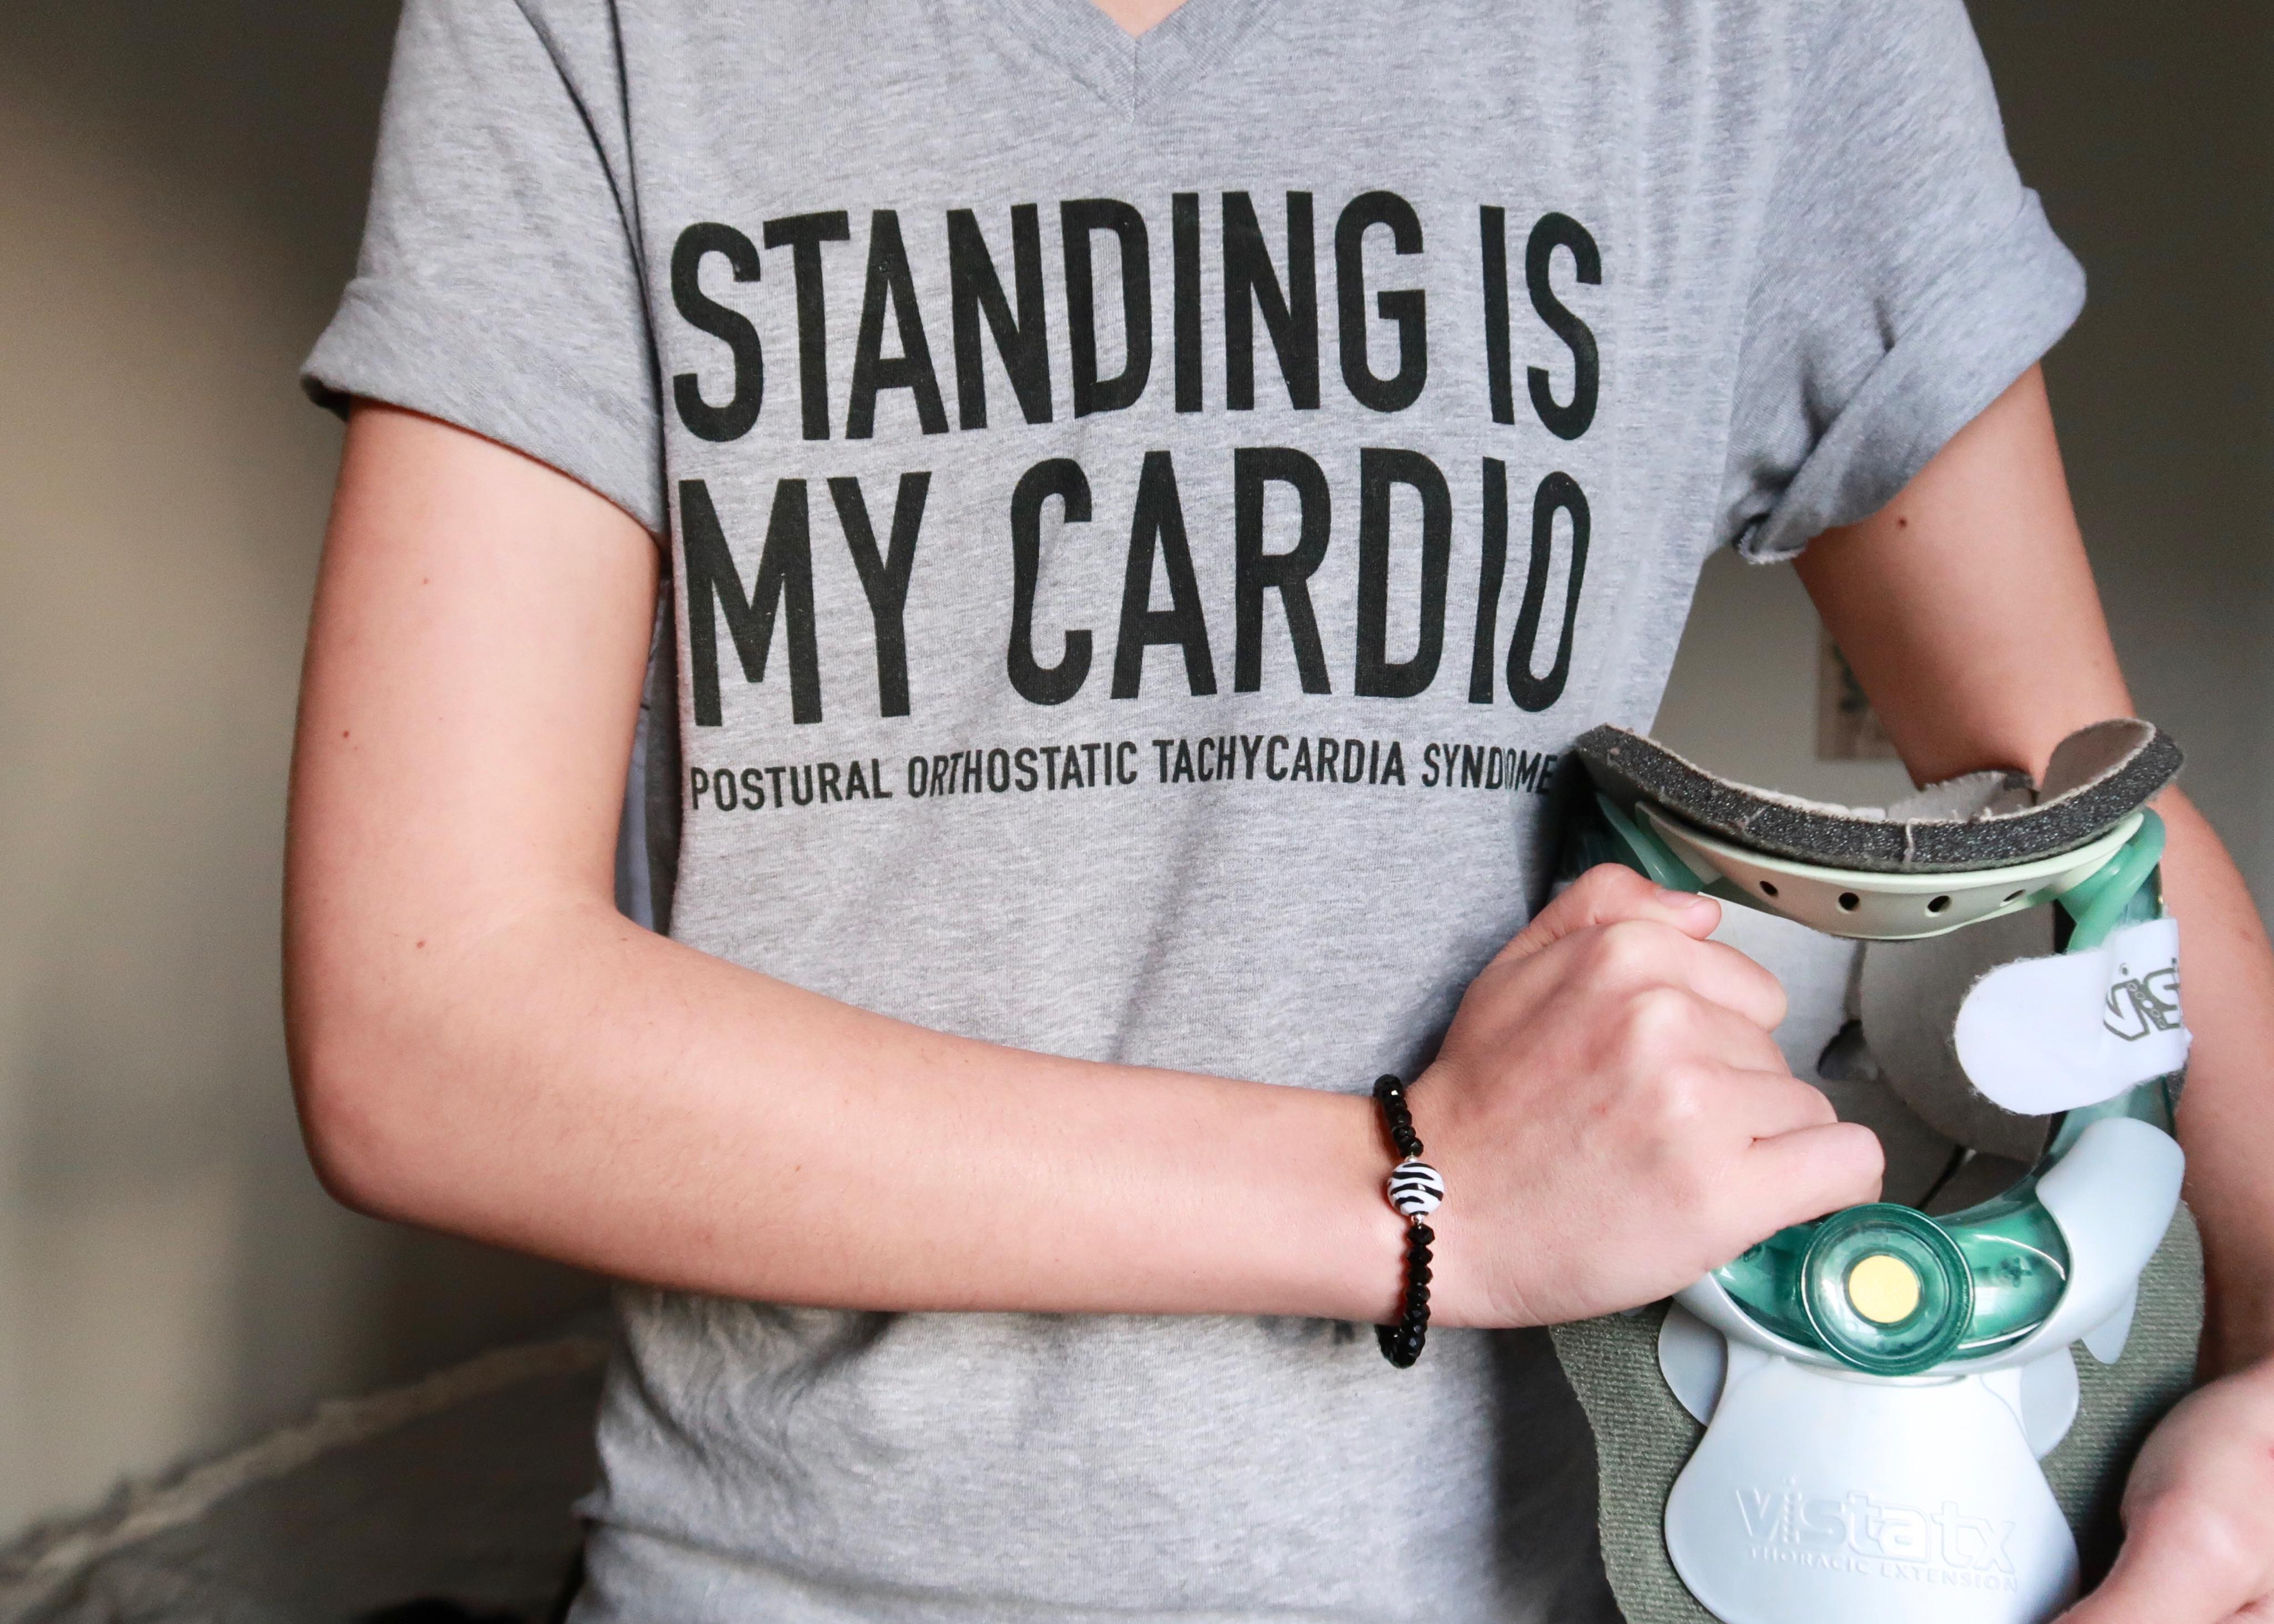 Jennifer wearing a t-shirt that says "standing is my cardio."